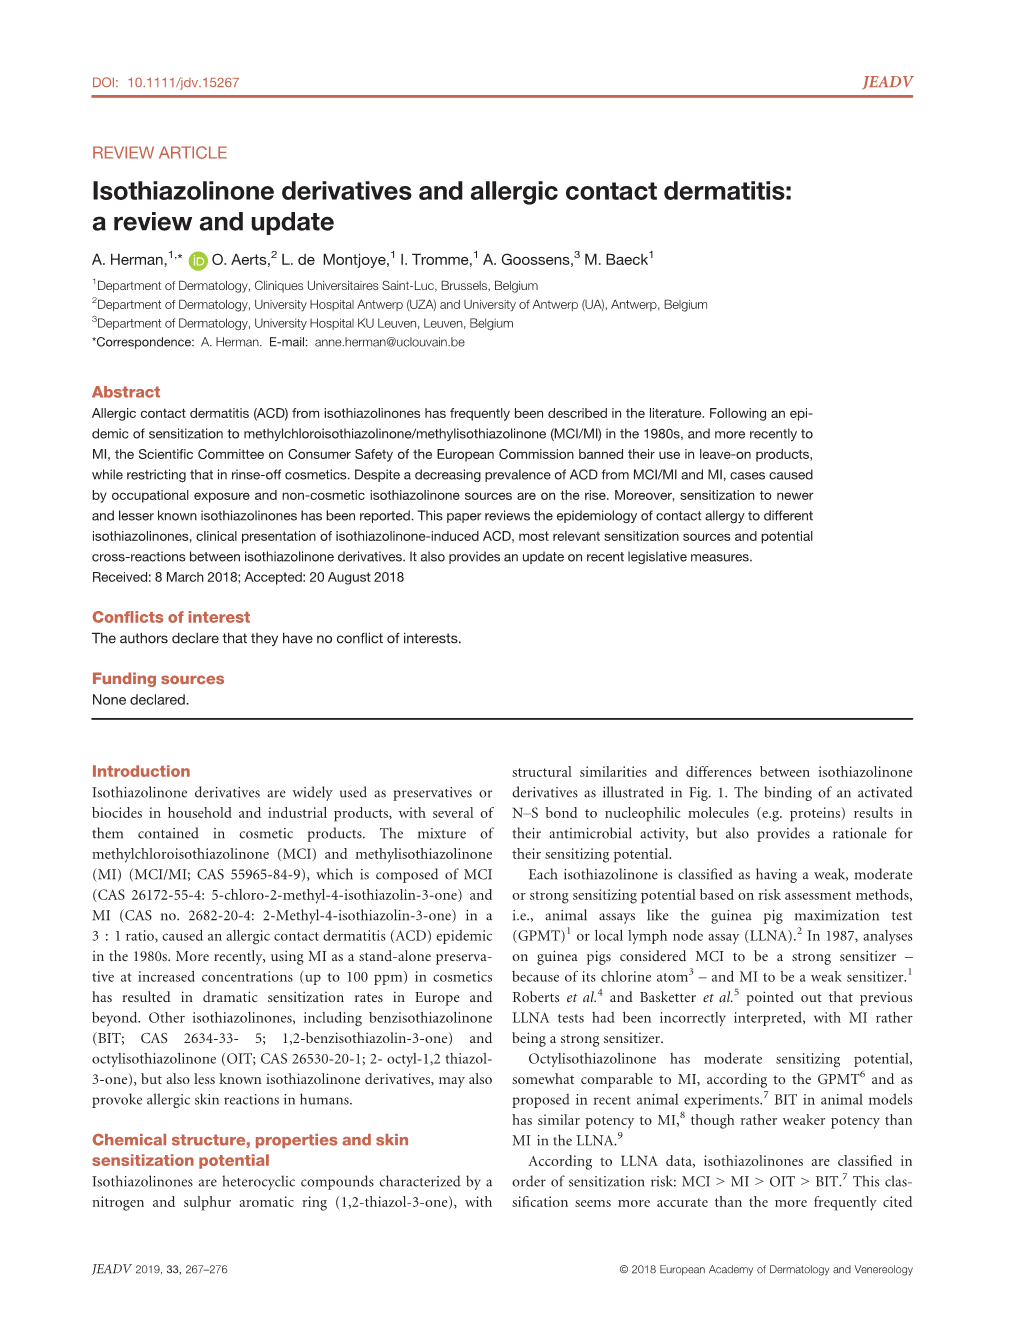 Isothiazolinone Derivatives and Allergic Contact Dermatitis: a Review and Update